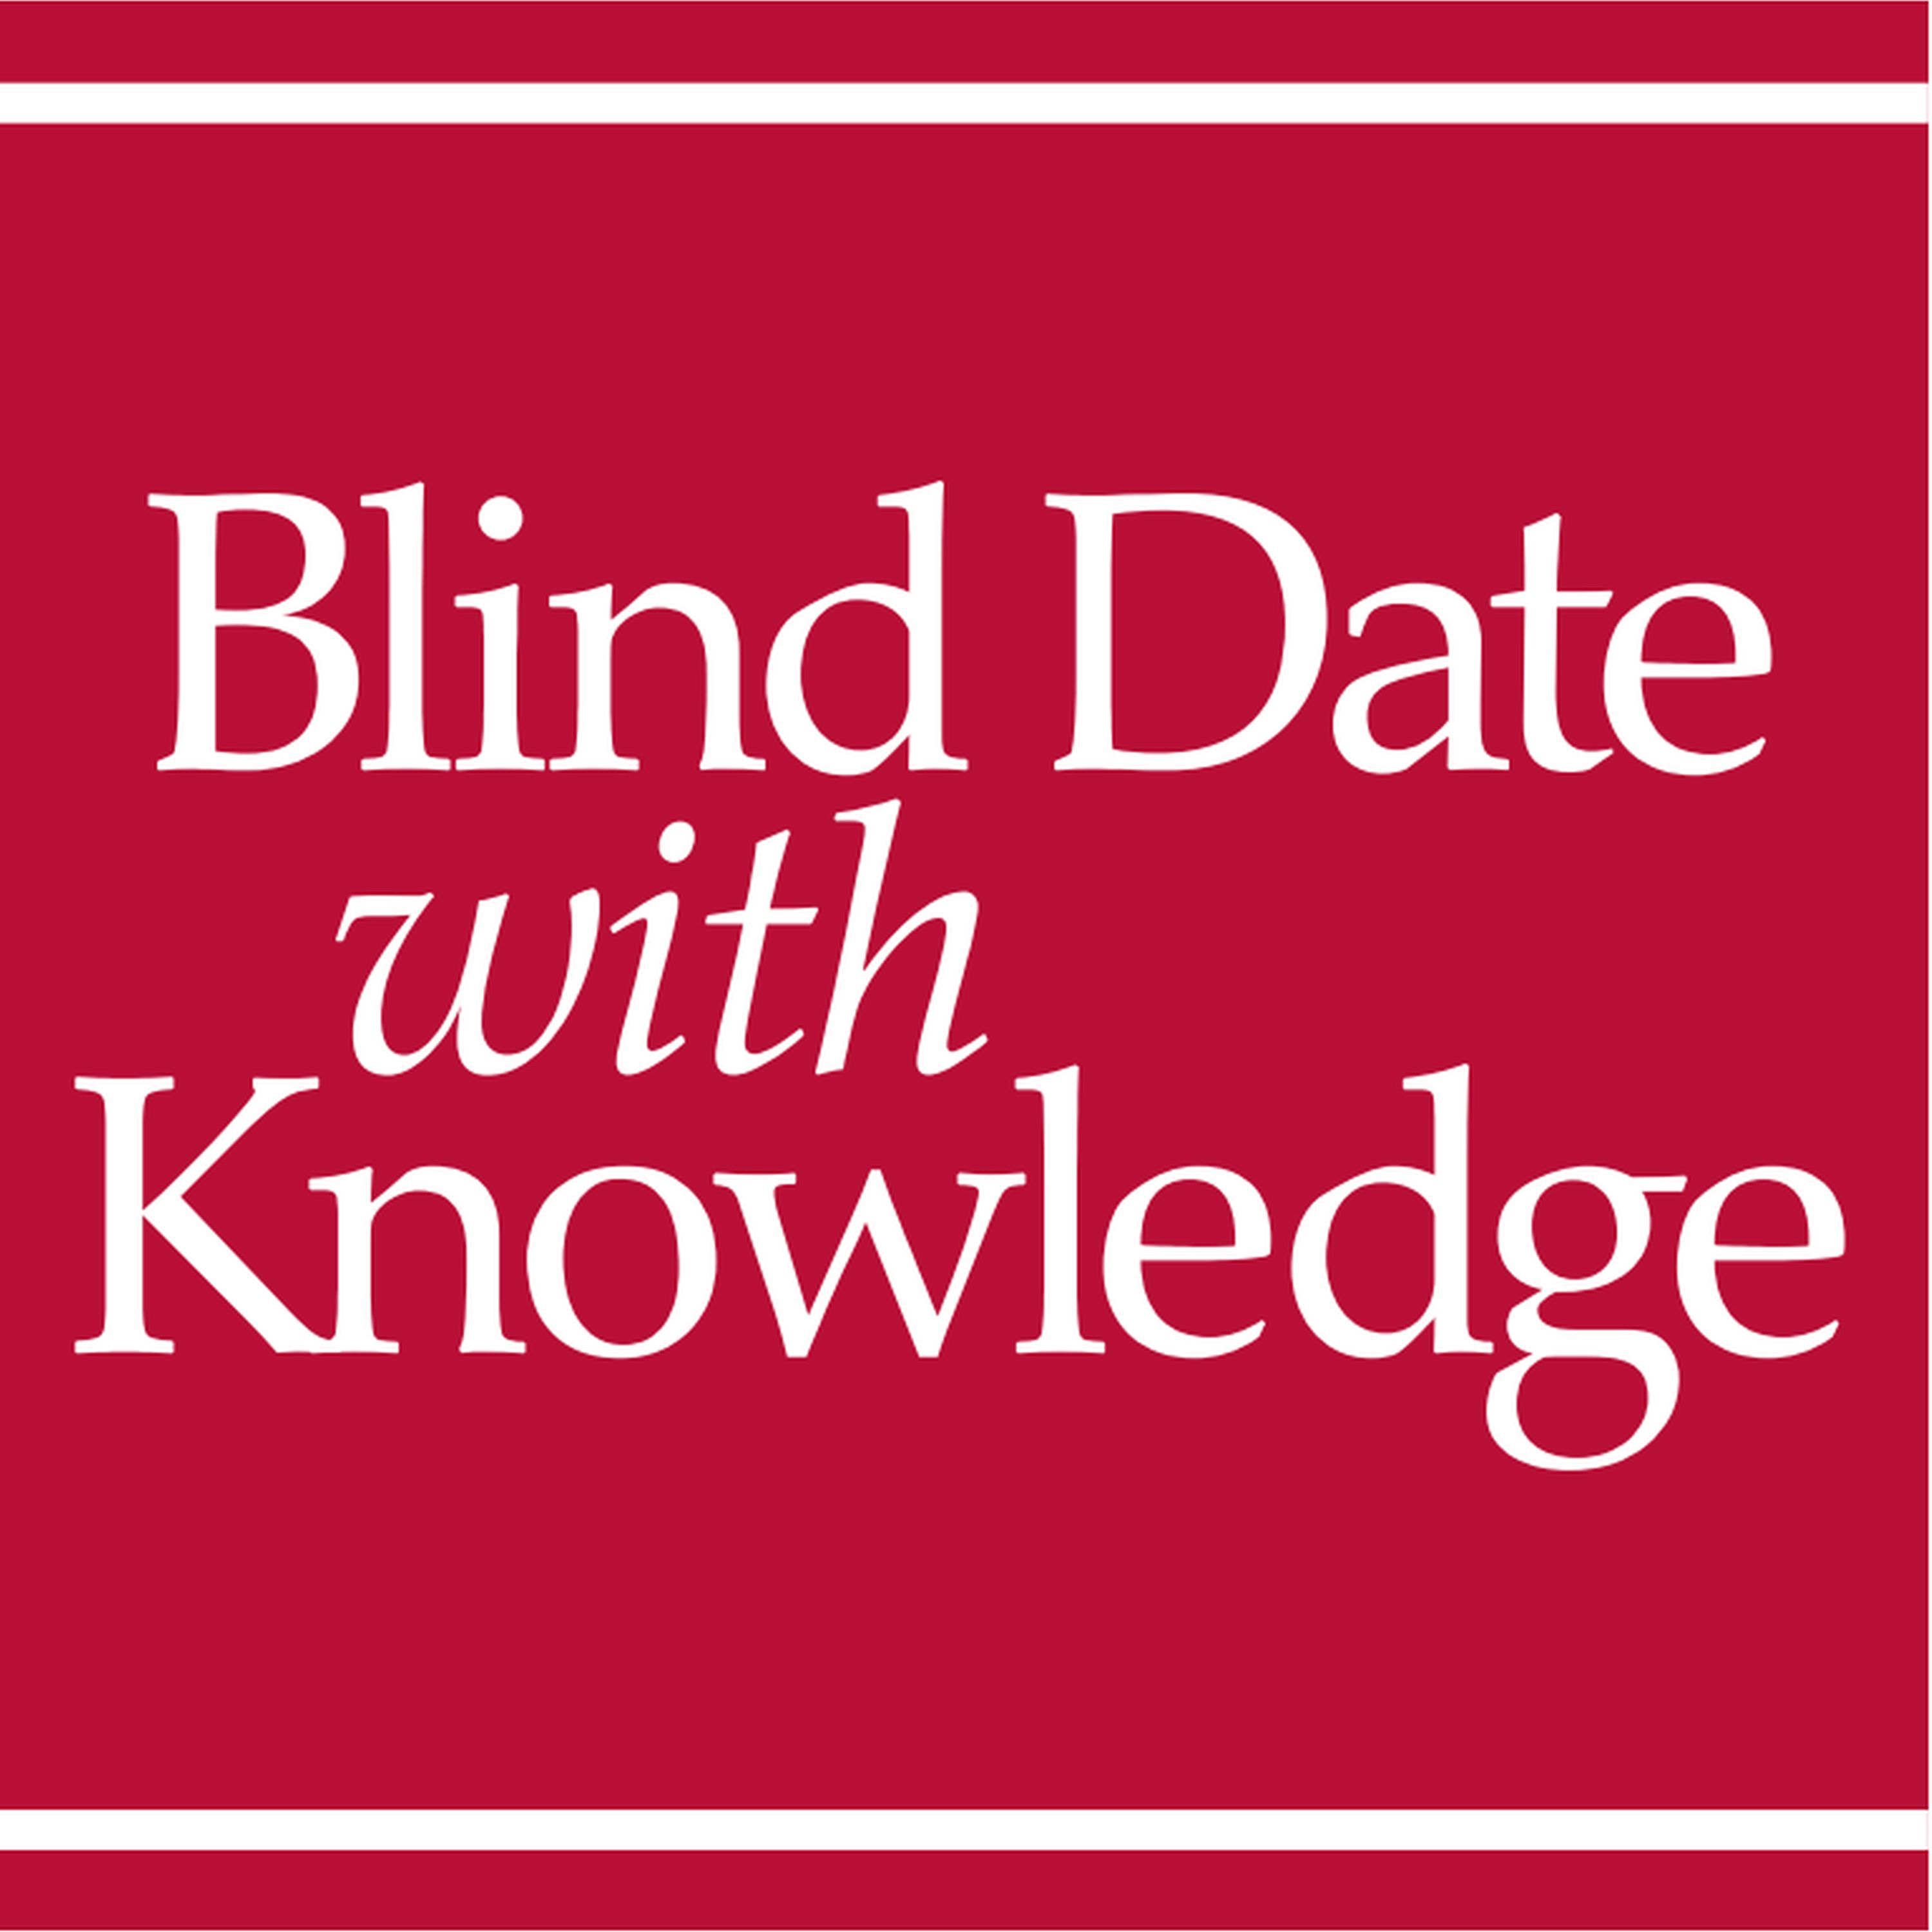 Blind Date with Knowledge - Queen's Research 